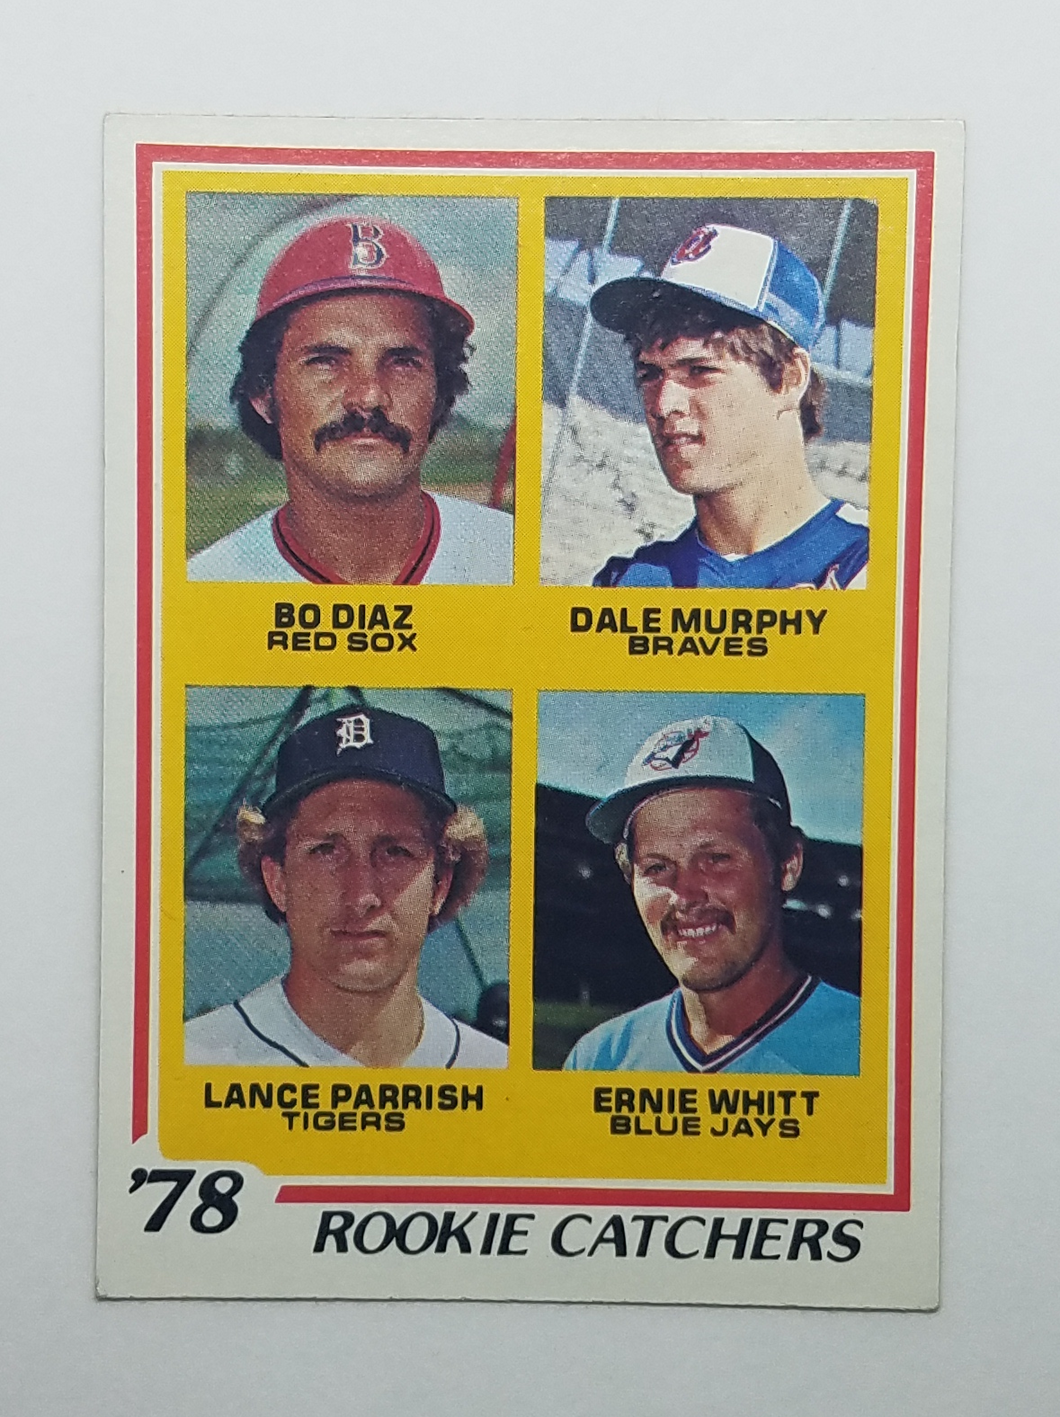 1978 Topps Rookie Catchers Baseball Rookie Card